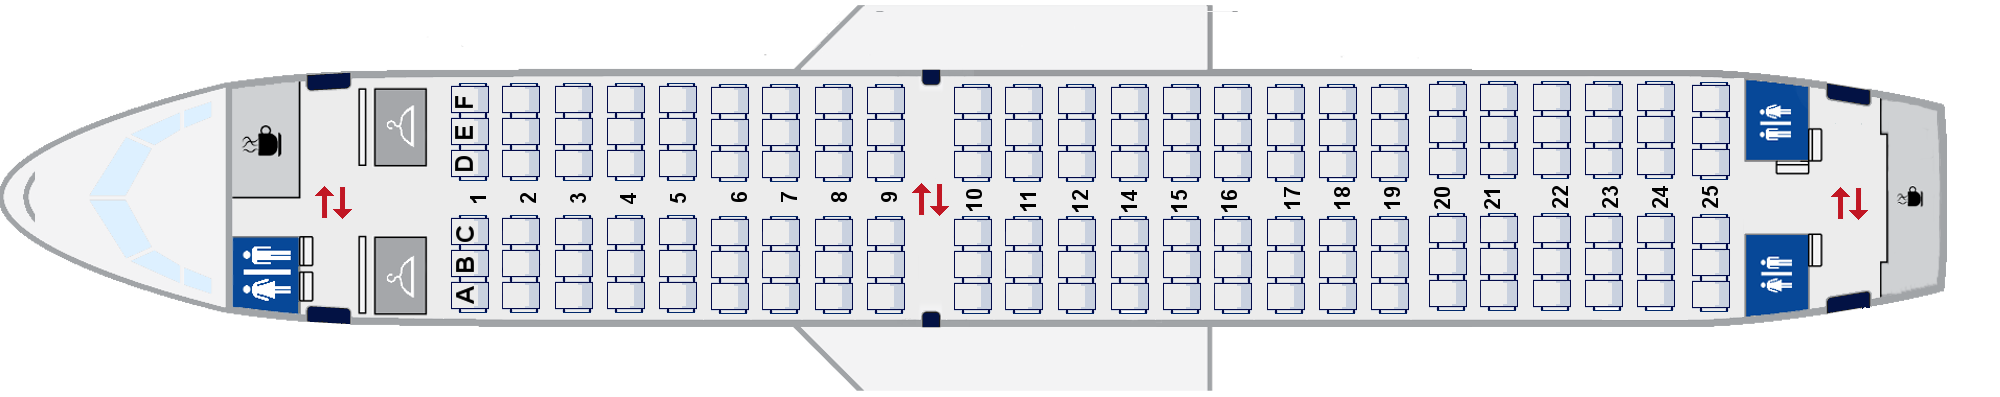 airbus a319 seating